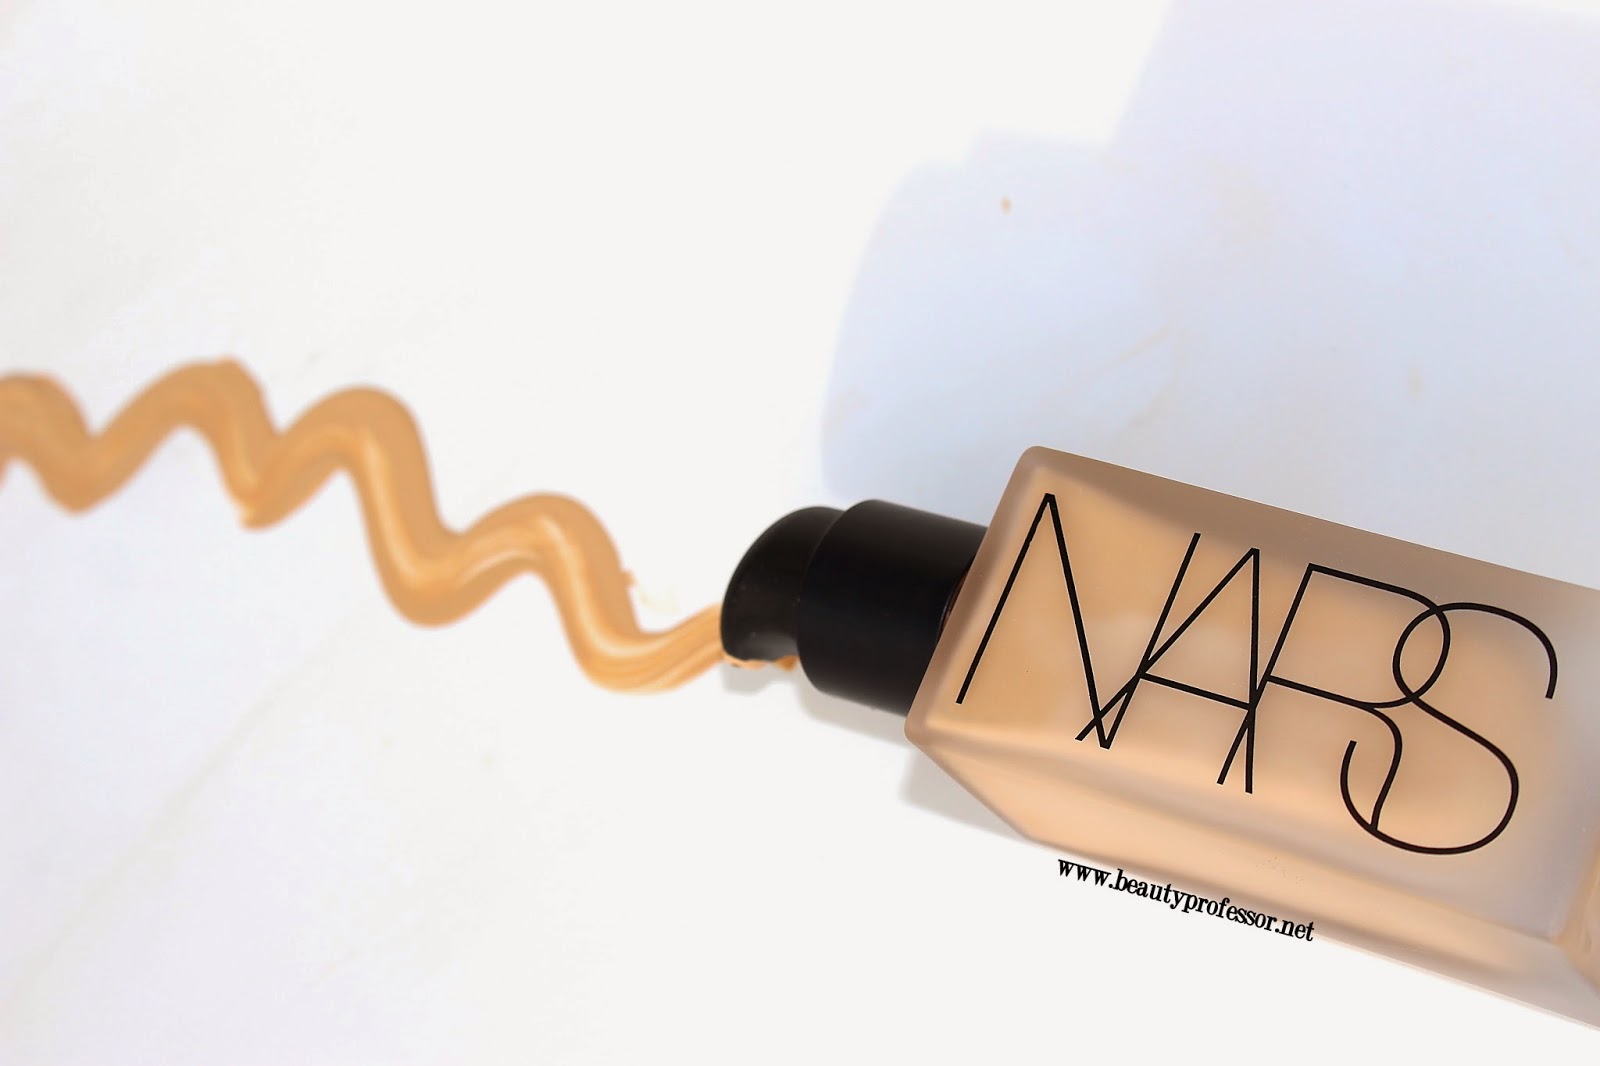 NARS All Day + - Swatches Professor Weightless Beauty Luminous Shade! Impressions of Foundation...Intial EVERY